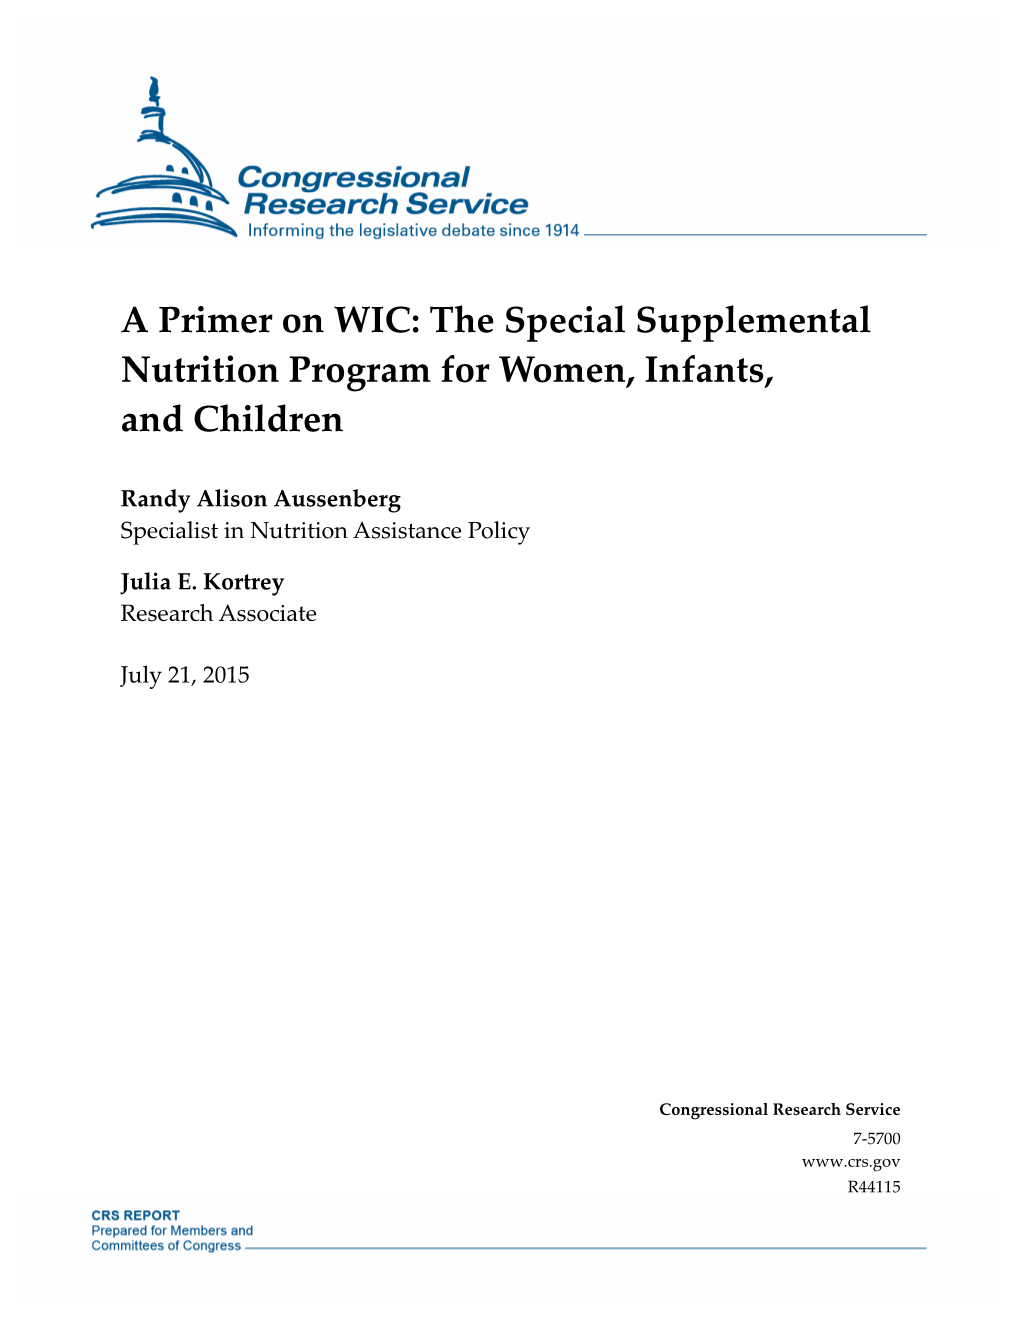 A Primer on WIC: the Special Supplemental Nutrition Program for Women, Infants, and Children